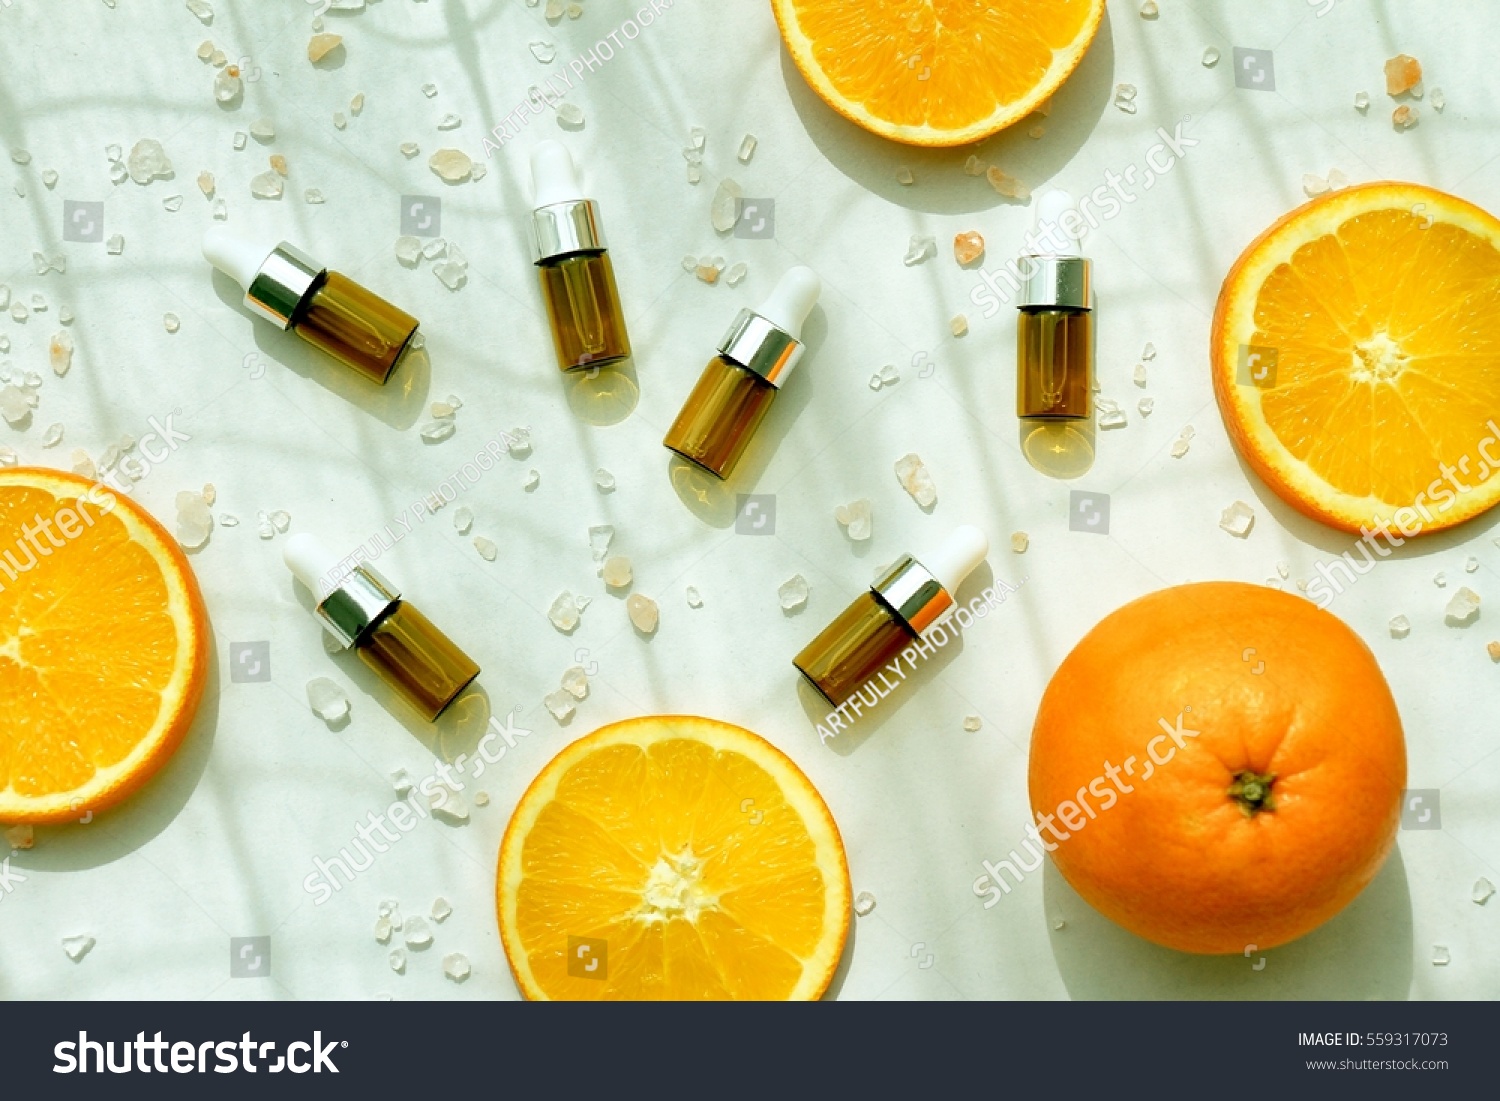 Cosmetic brown bottle containers with fresh orange slices, Blank label for branding mock-up, Natural Vitamin C beauty product concept. (Color Processed) #559317073